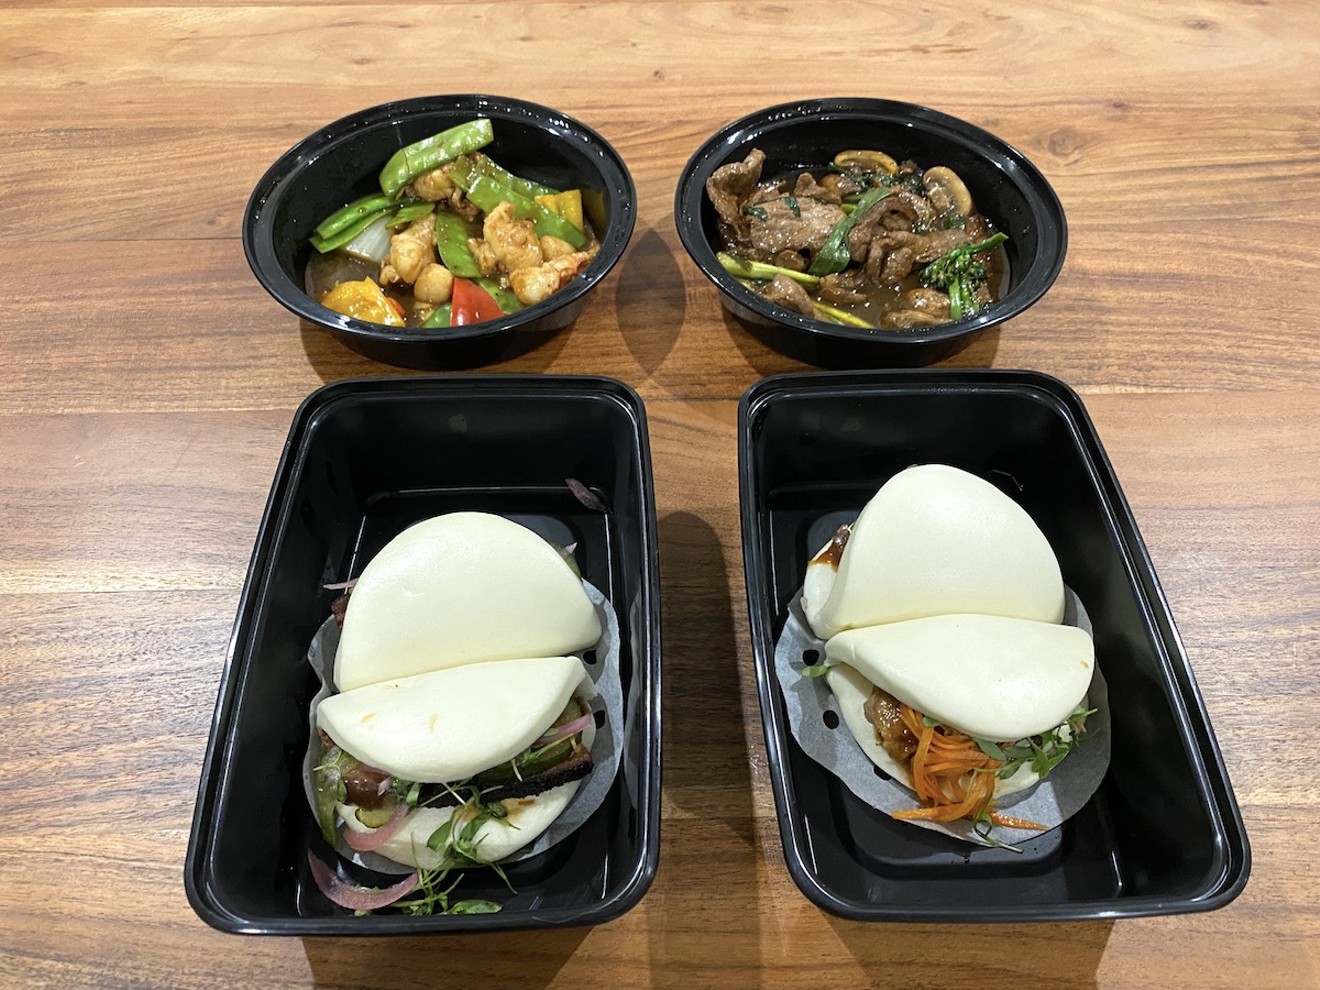 BoyChoy's bao buns arrive by delivery in remarkably good condition.